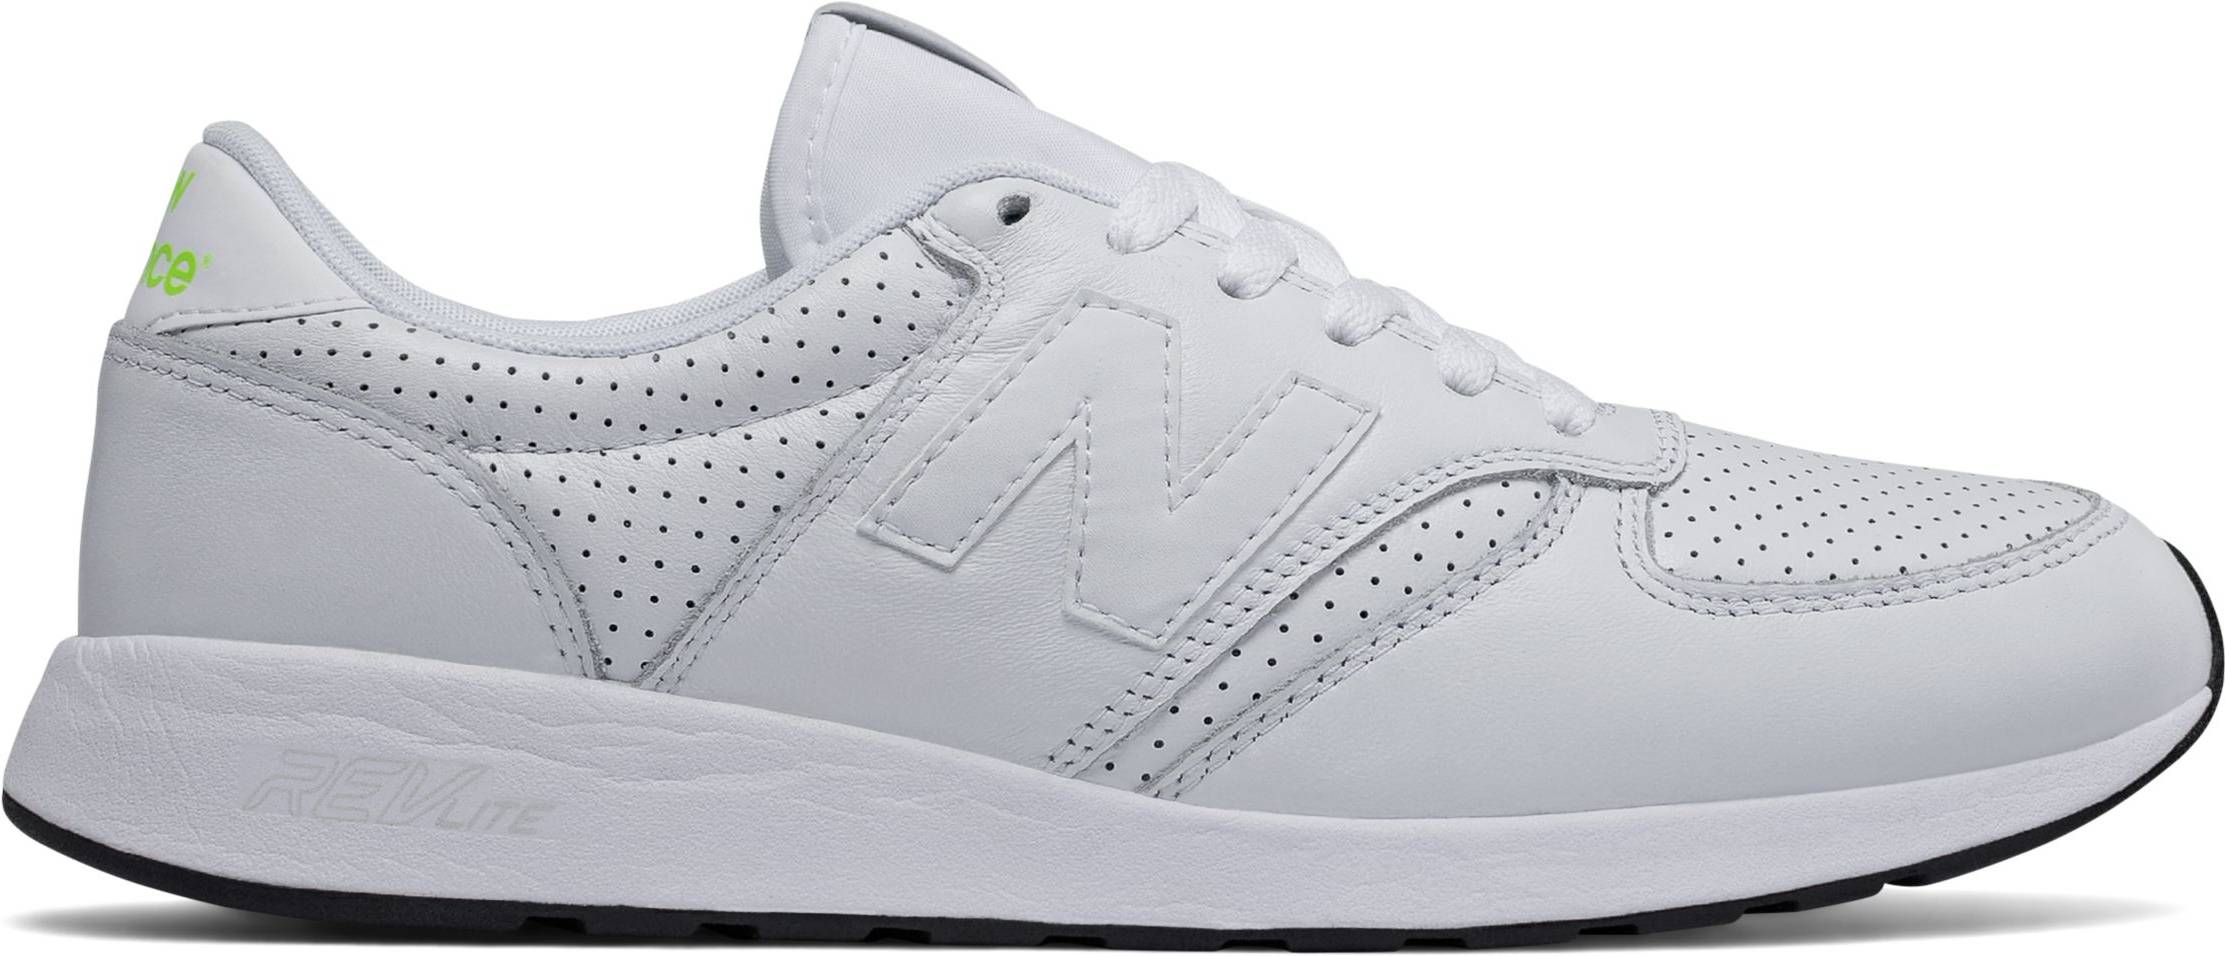 Save 43% on White New Balance Sneakers 